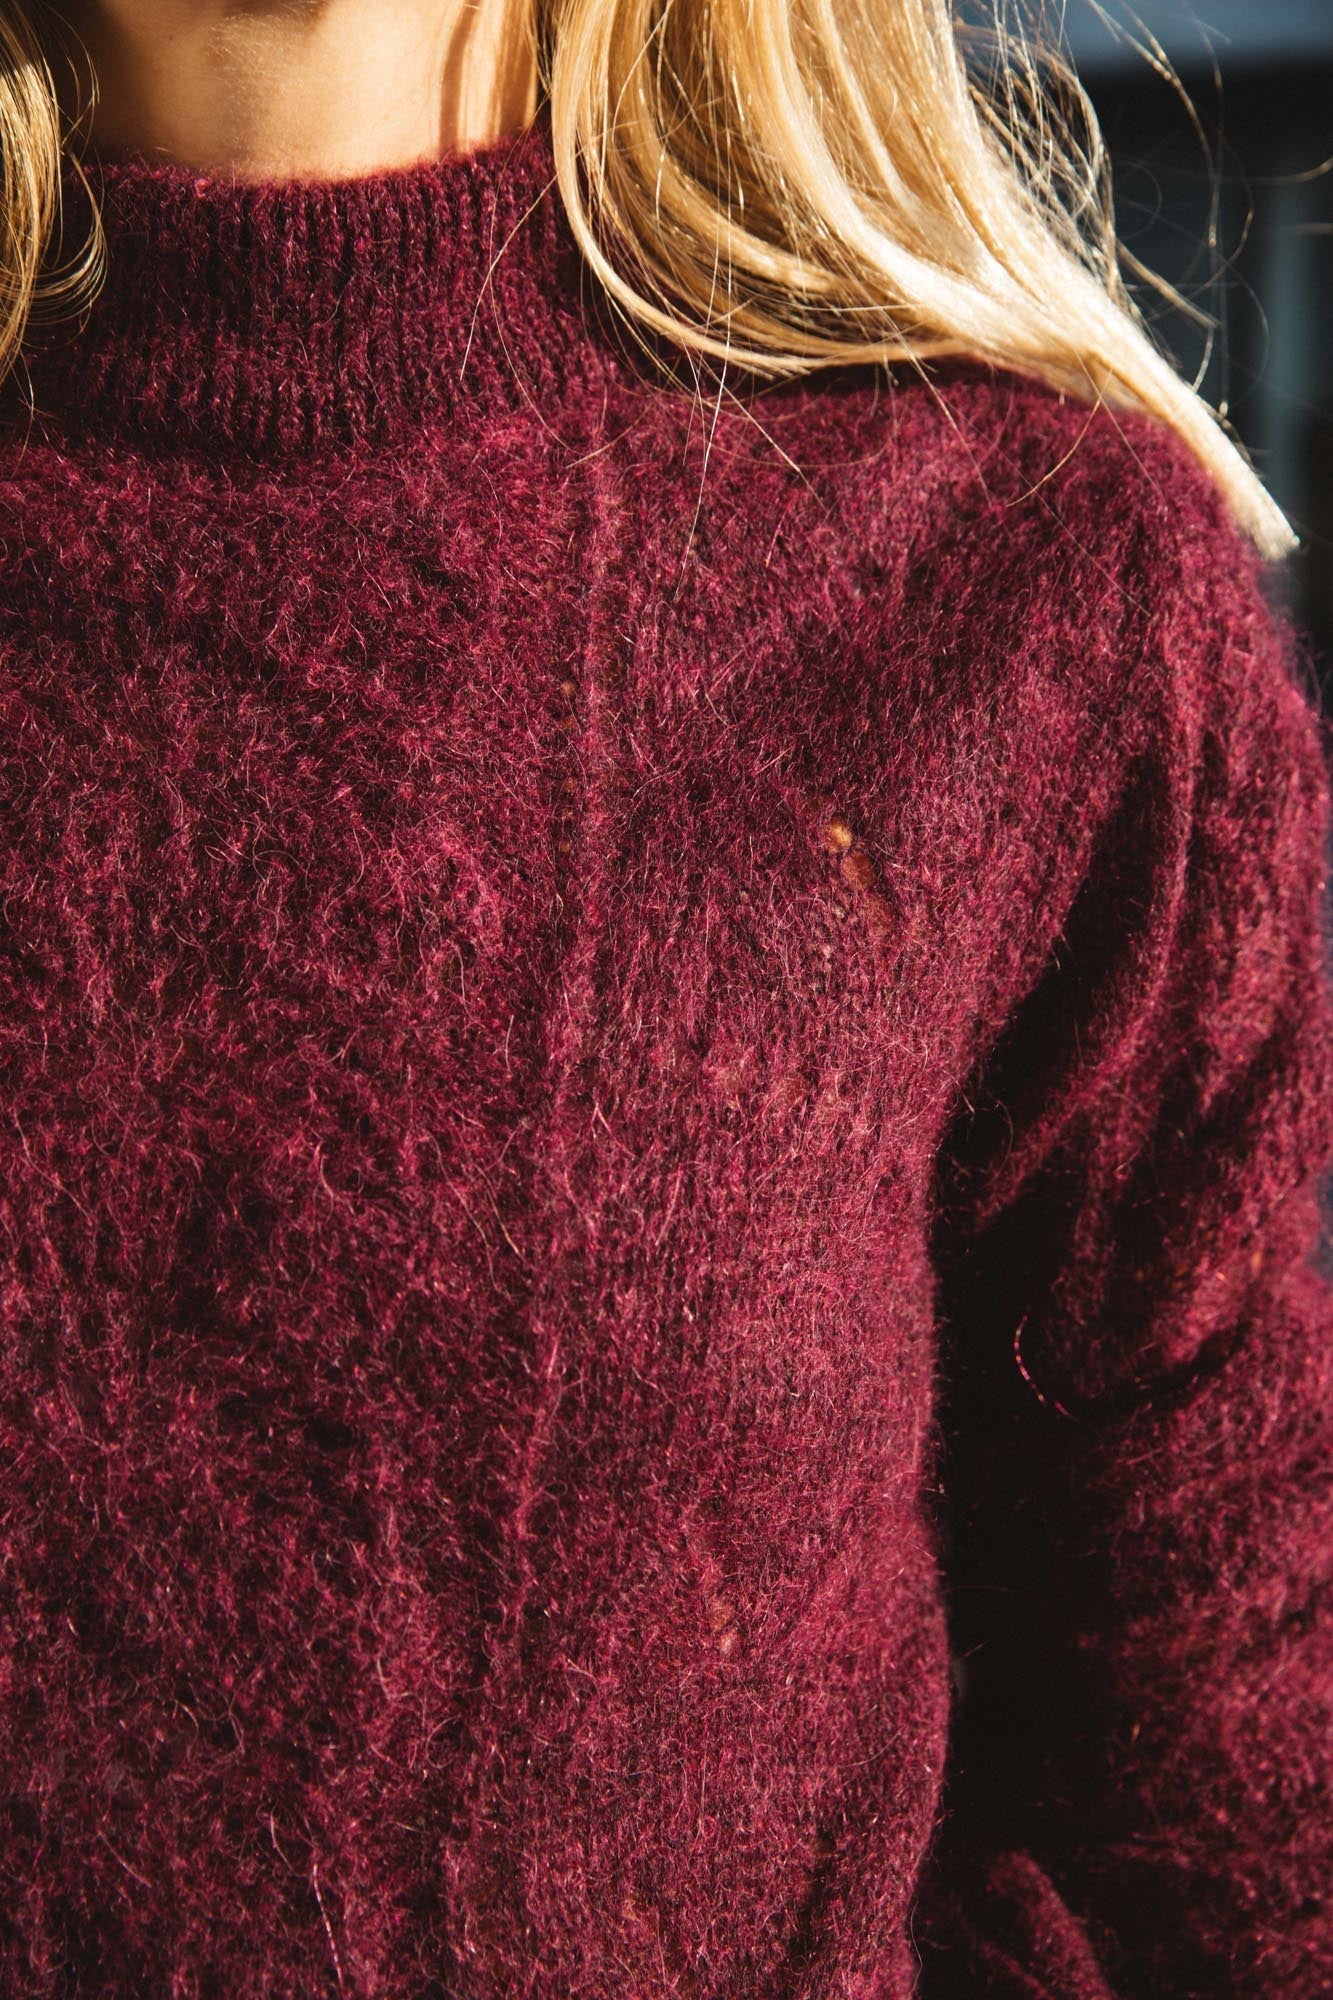 Colombe aubergine sweater in mohair and alpaca